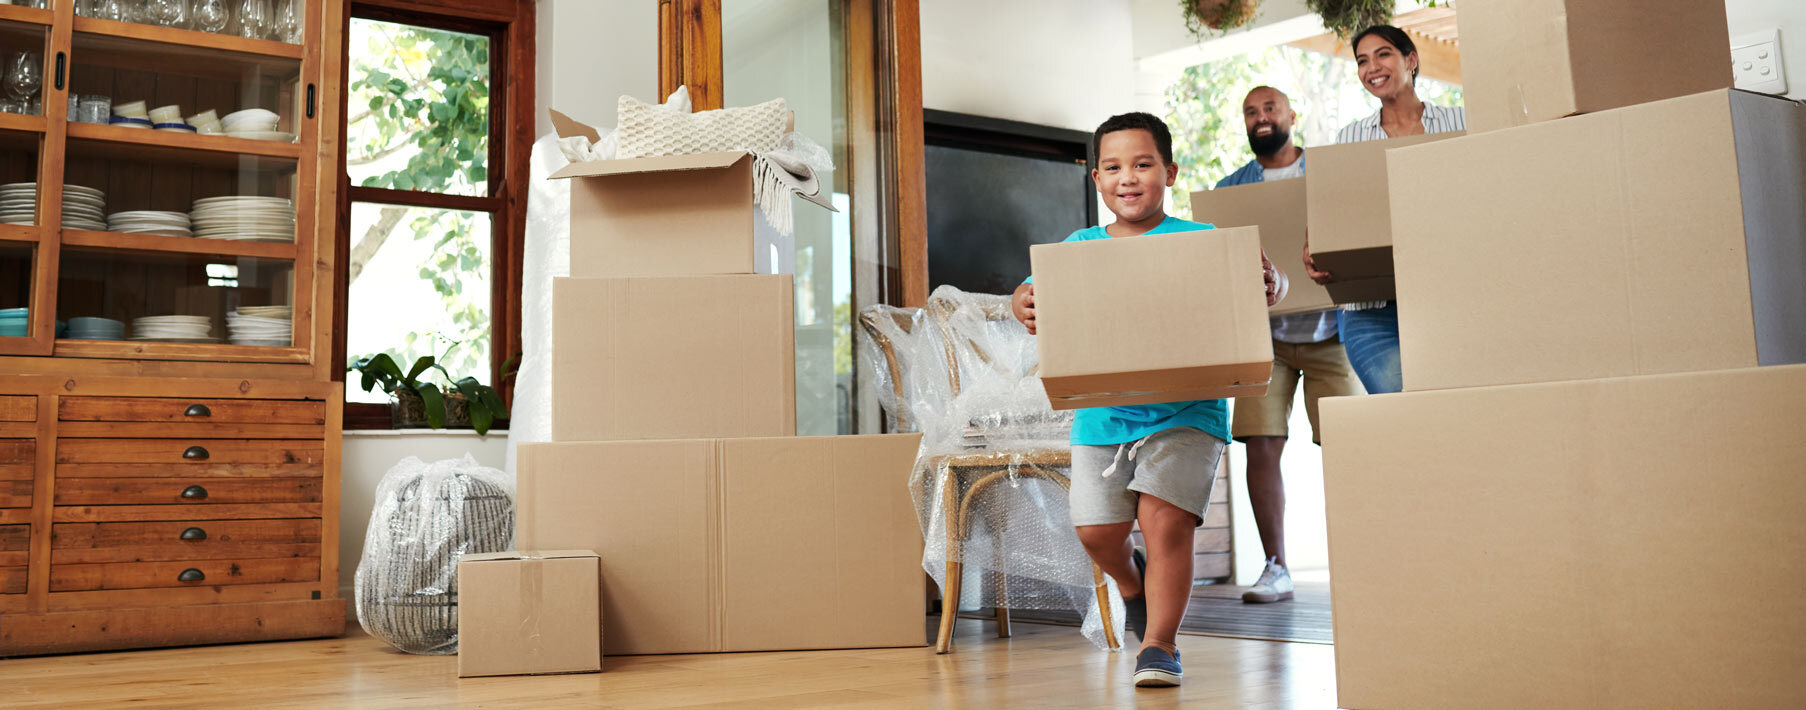 A little boy holding a moving box runs through a living room filled with moving boxes.